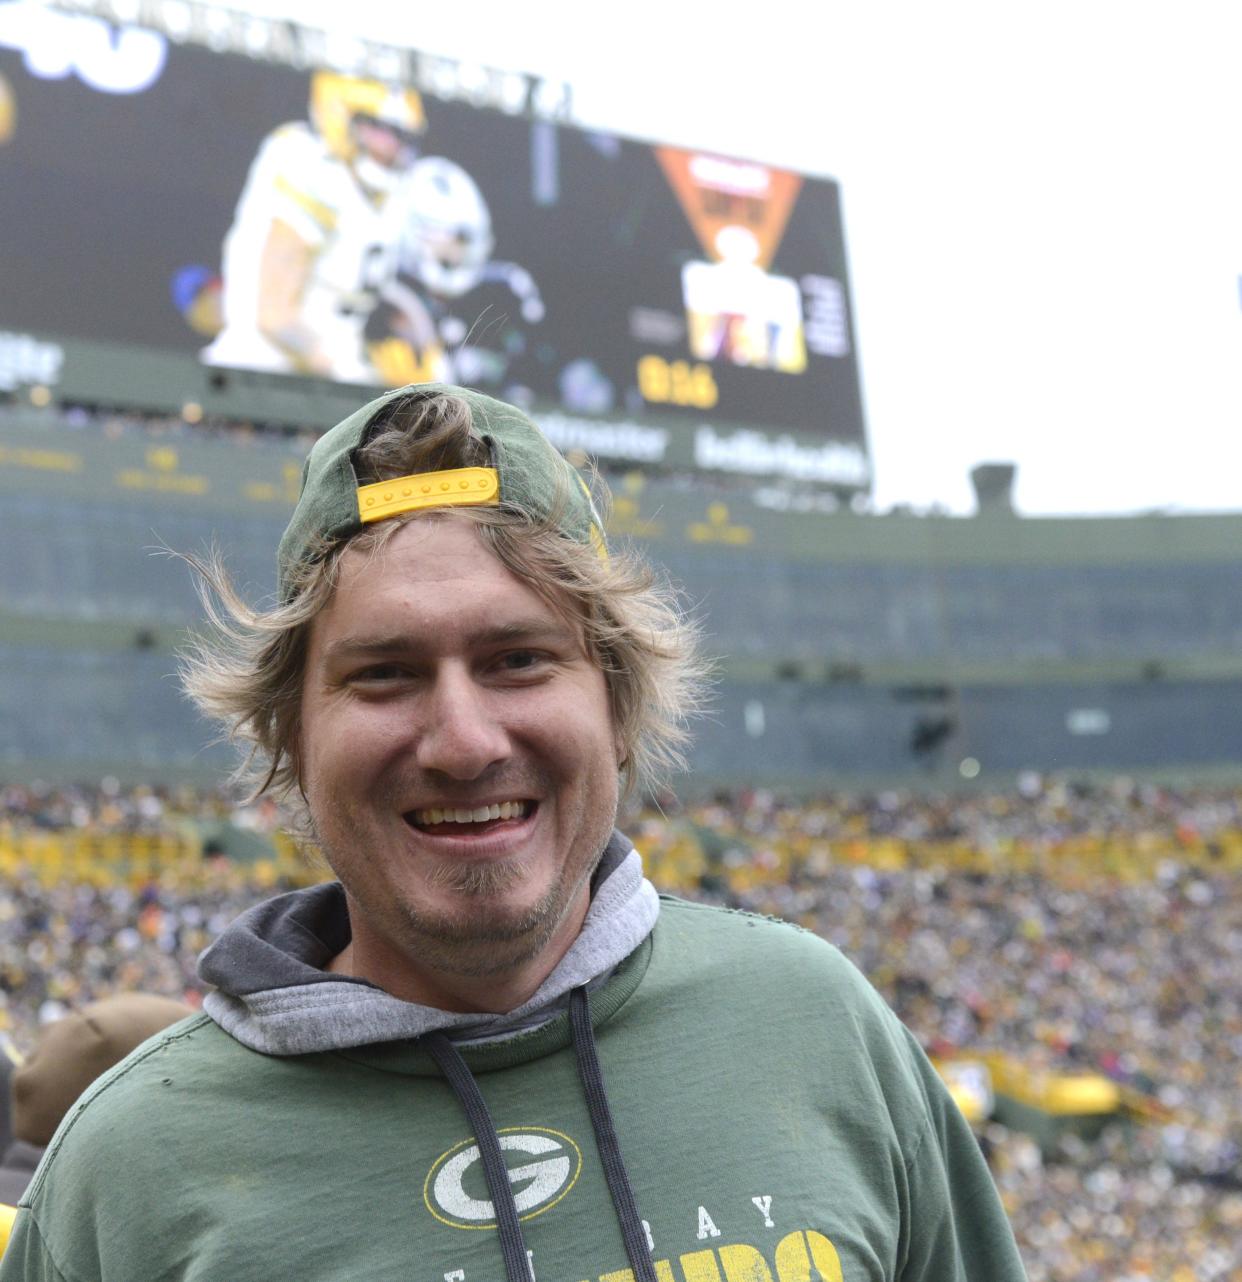 Justin Sterna of Mequon attends the Green Bay Packers-Minnesota Vikings game on Oct. 29 at Lambeau Field in Green Bay.